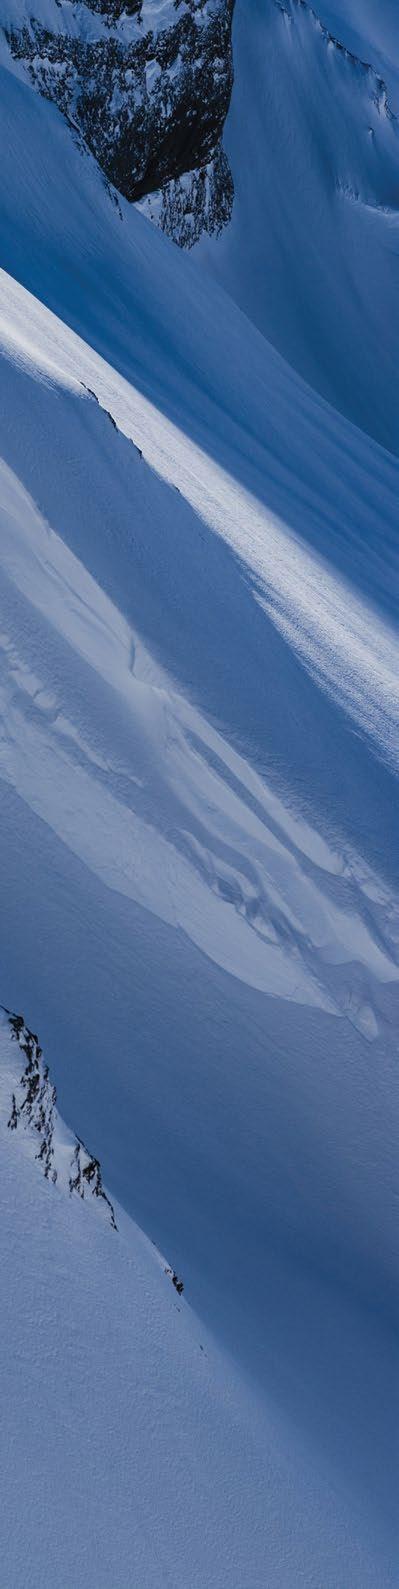 BLIZZARD SKI 2018/19 19 FREERIDE ALL-MOUNTAIN IN The world s best-selling, award winning freeride skis return and are primed to crush the 2018/19 season.